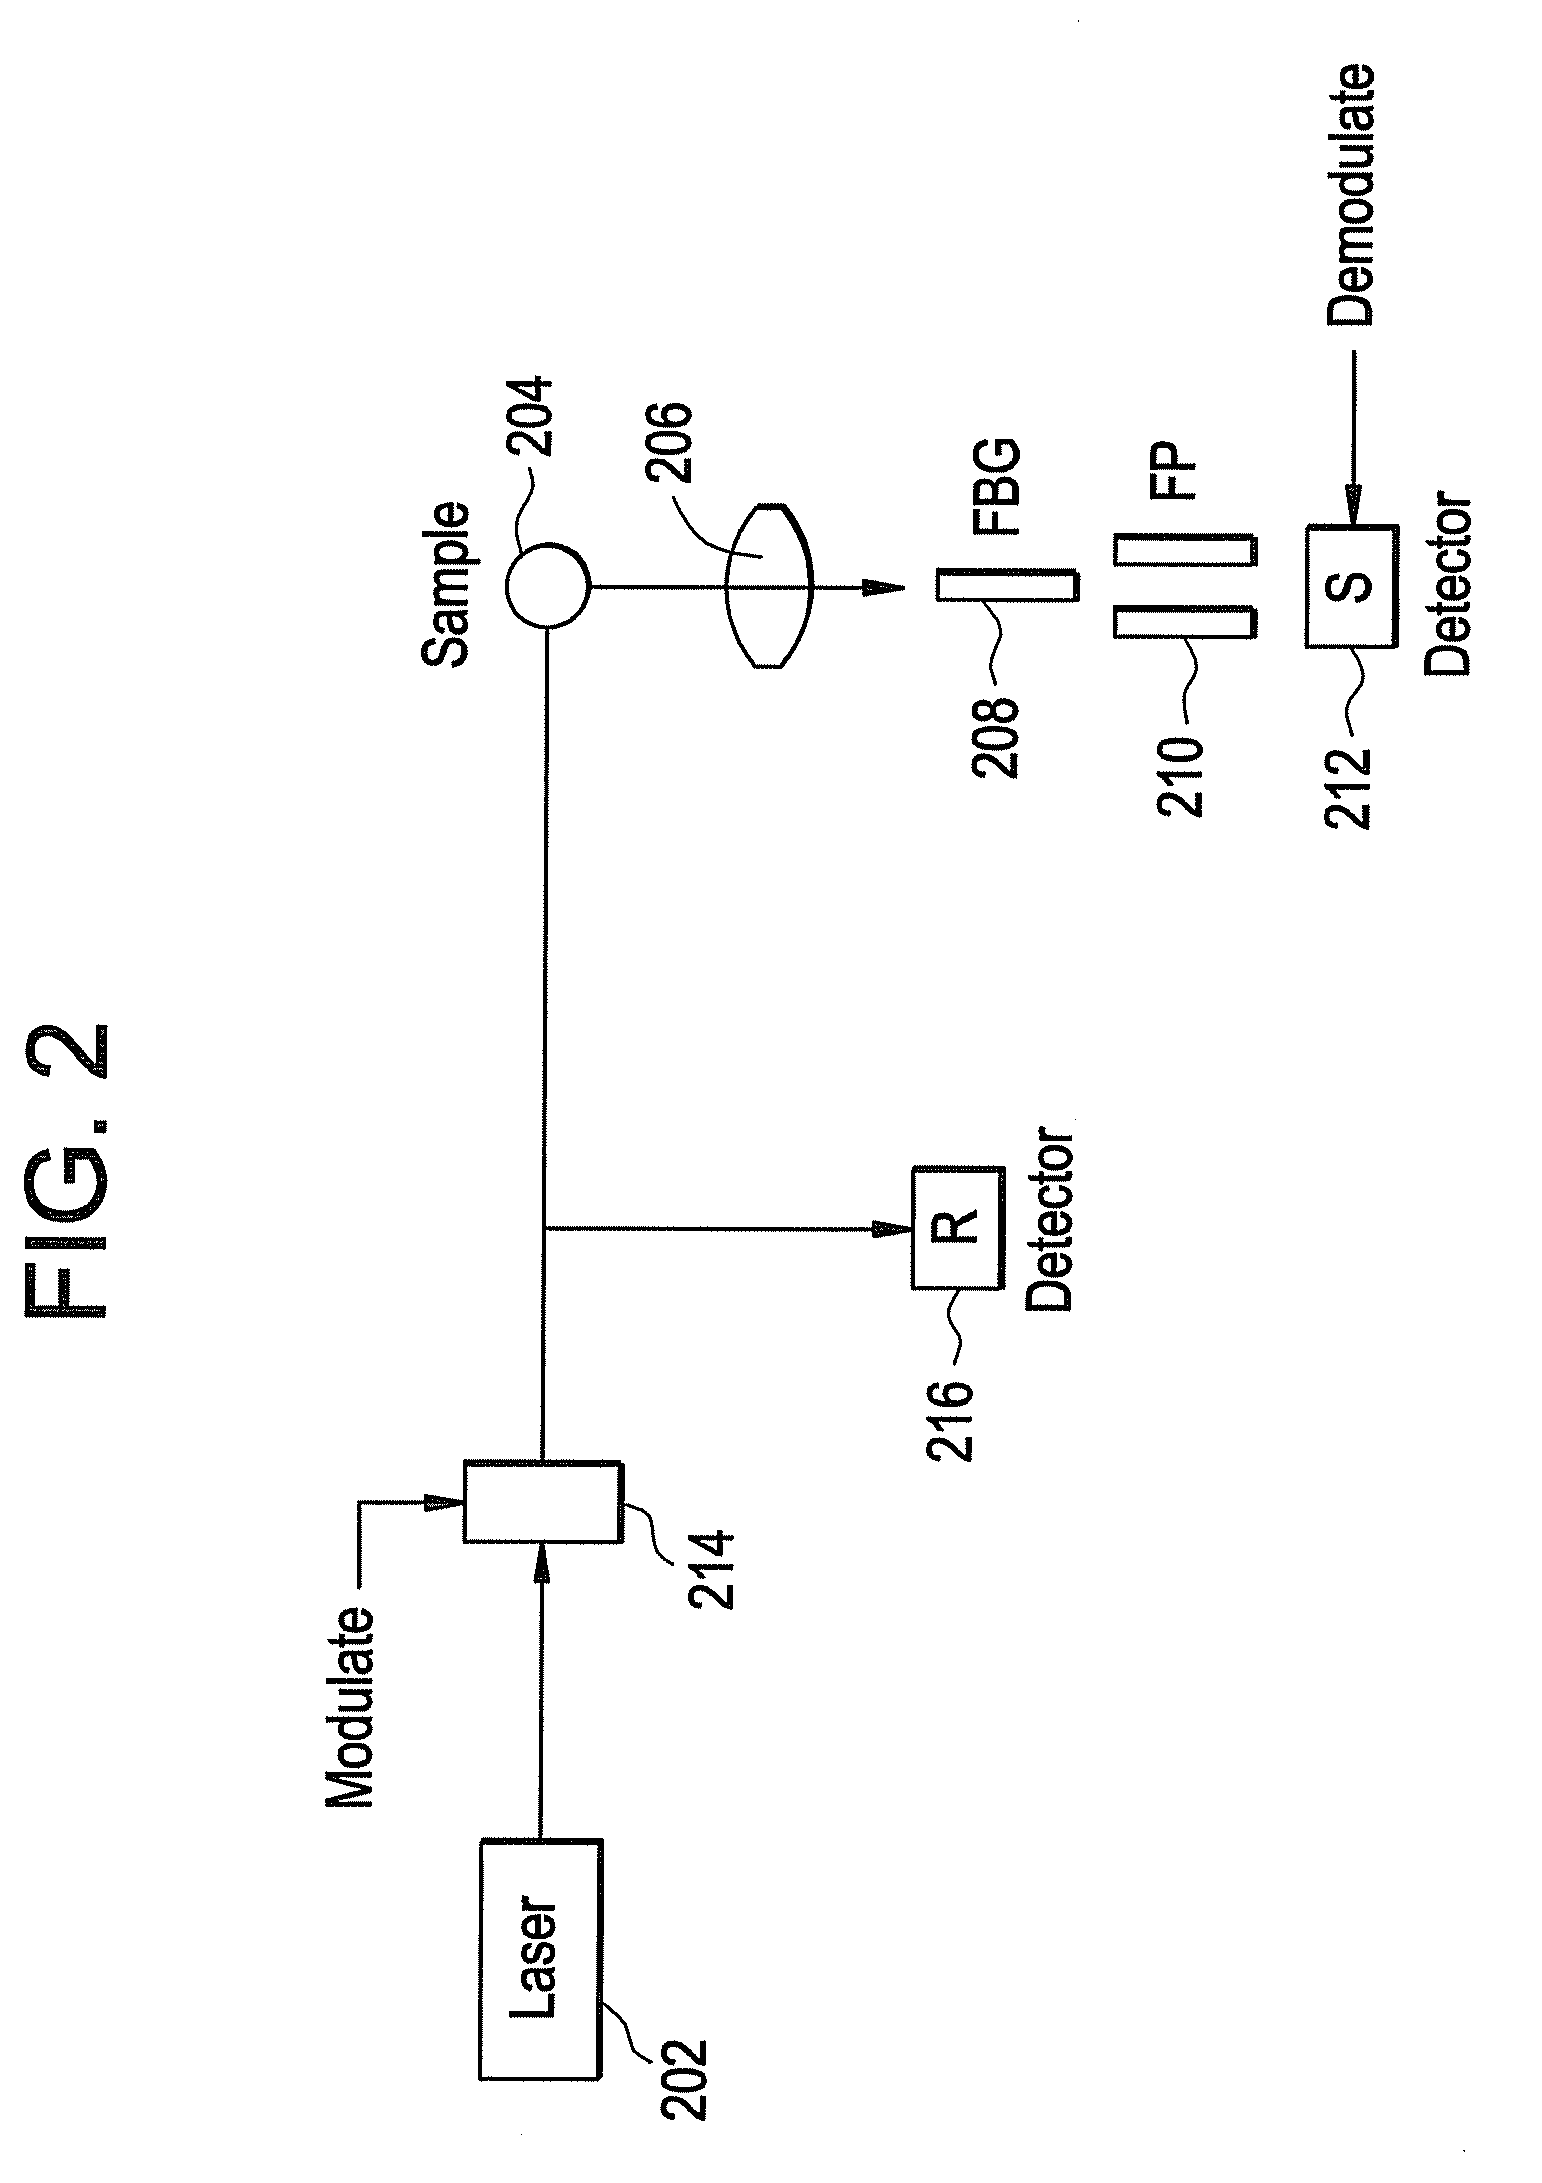 Method and apparatus for improved signal to noise ratio in raman signal detection for MEMS based spectrometers